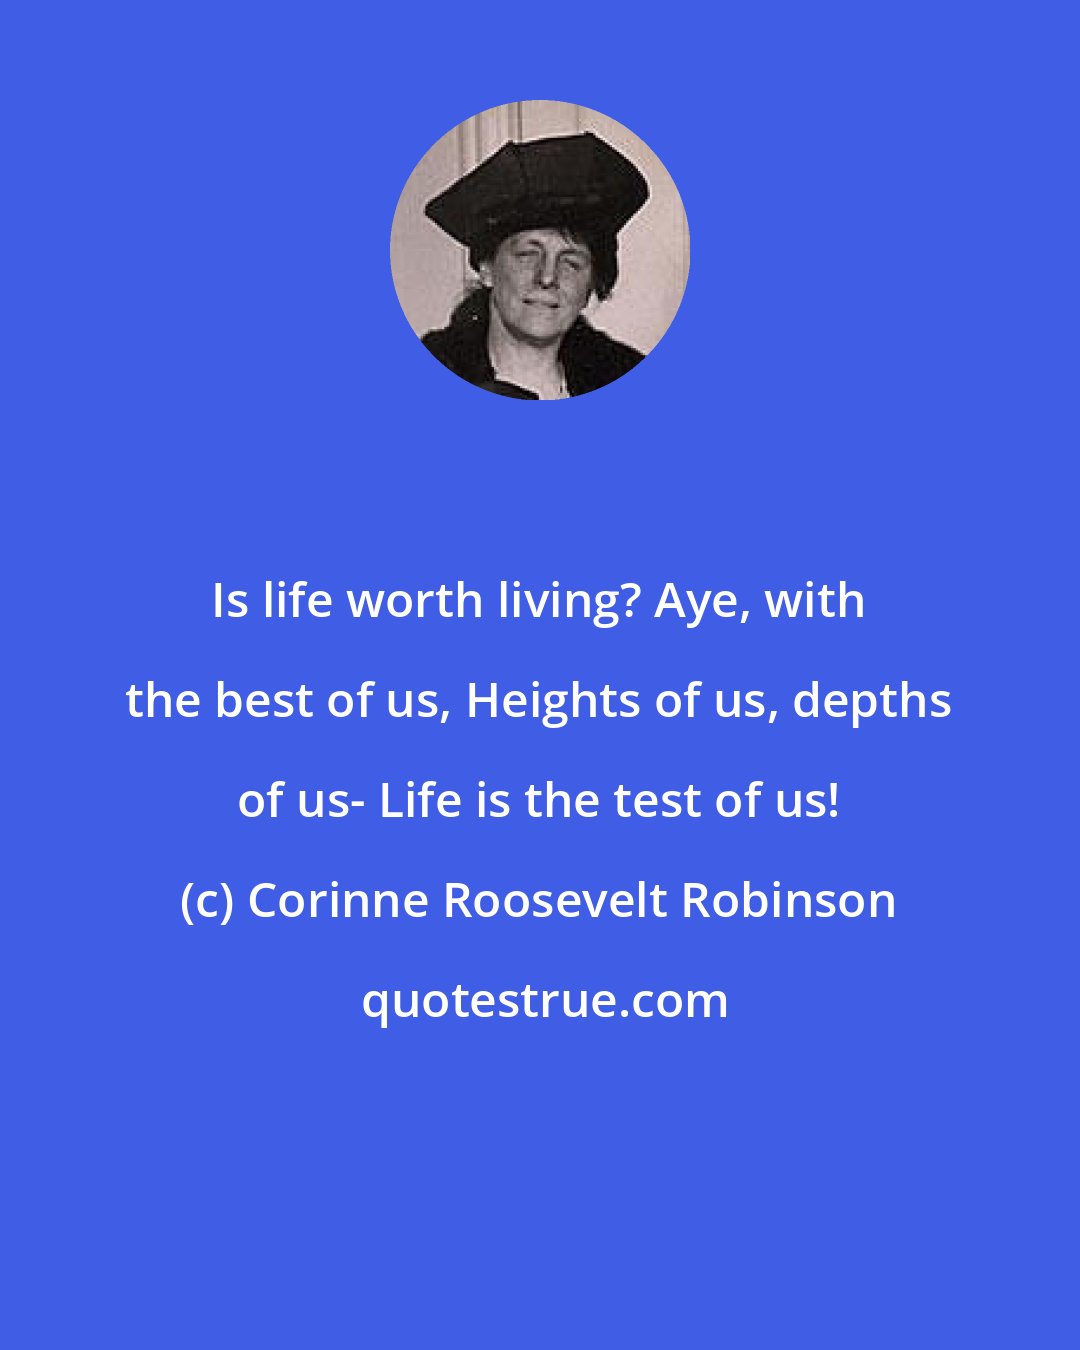 Corinne Roosevelt Robinson: Is life worth living? Aye, with the best of us, Heights of us, depths of us- Life is the test of us!